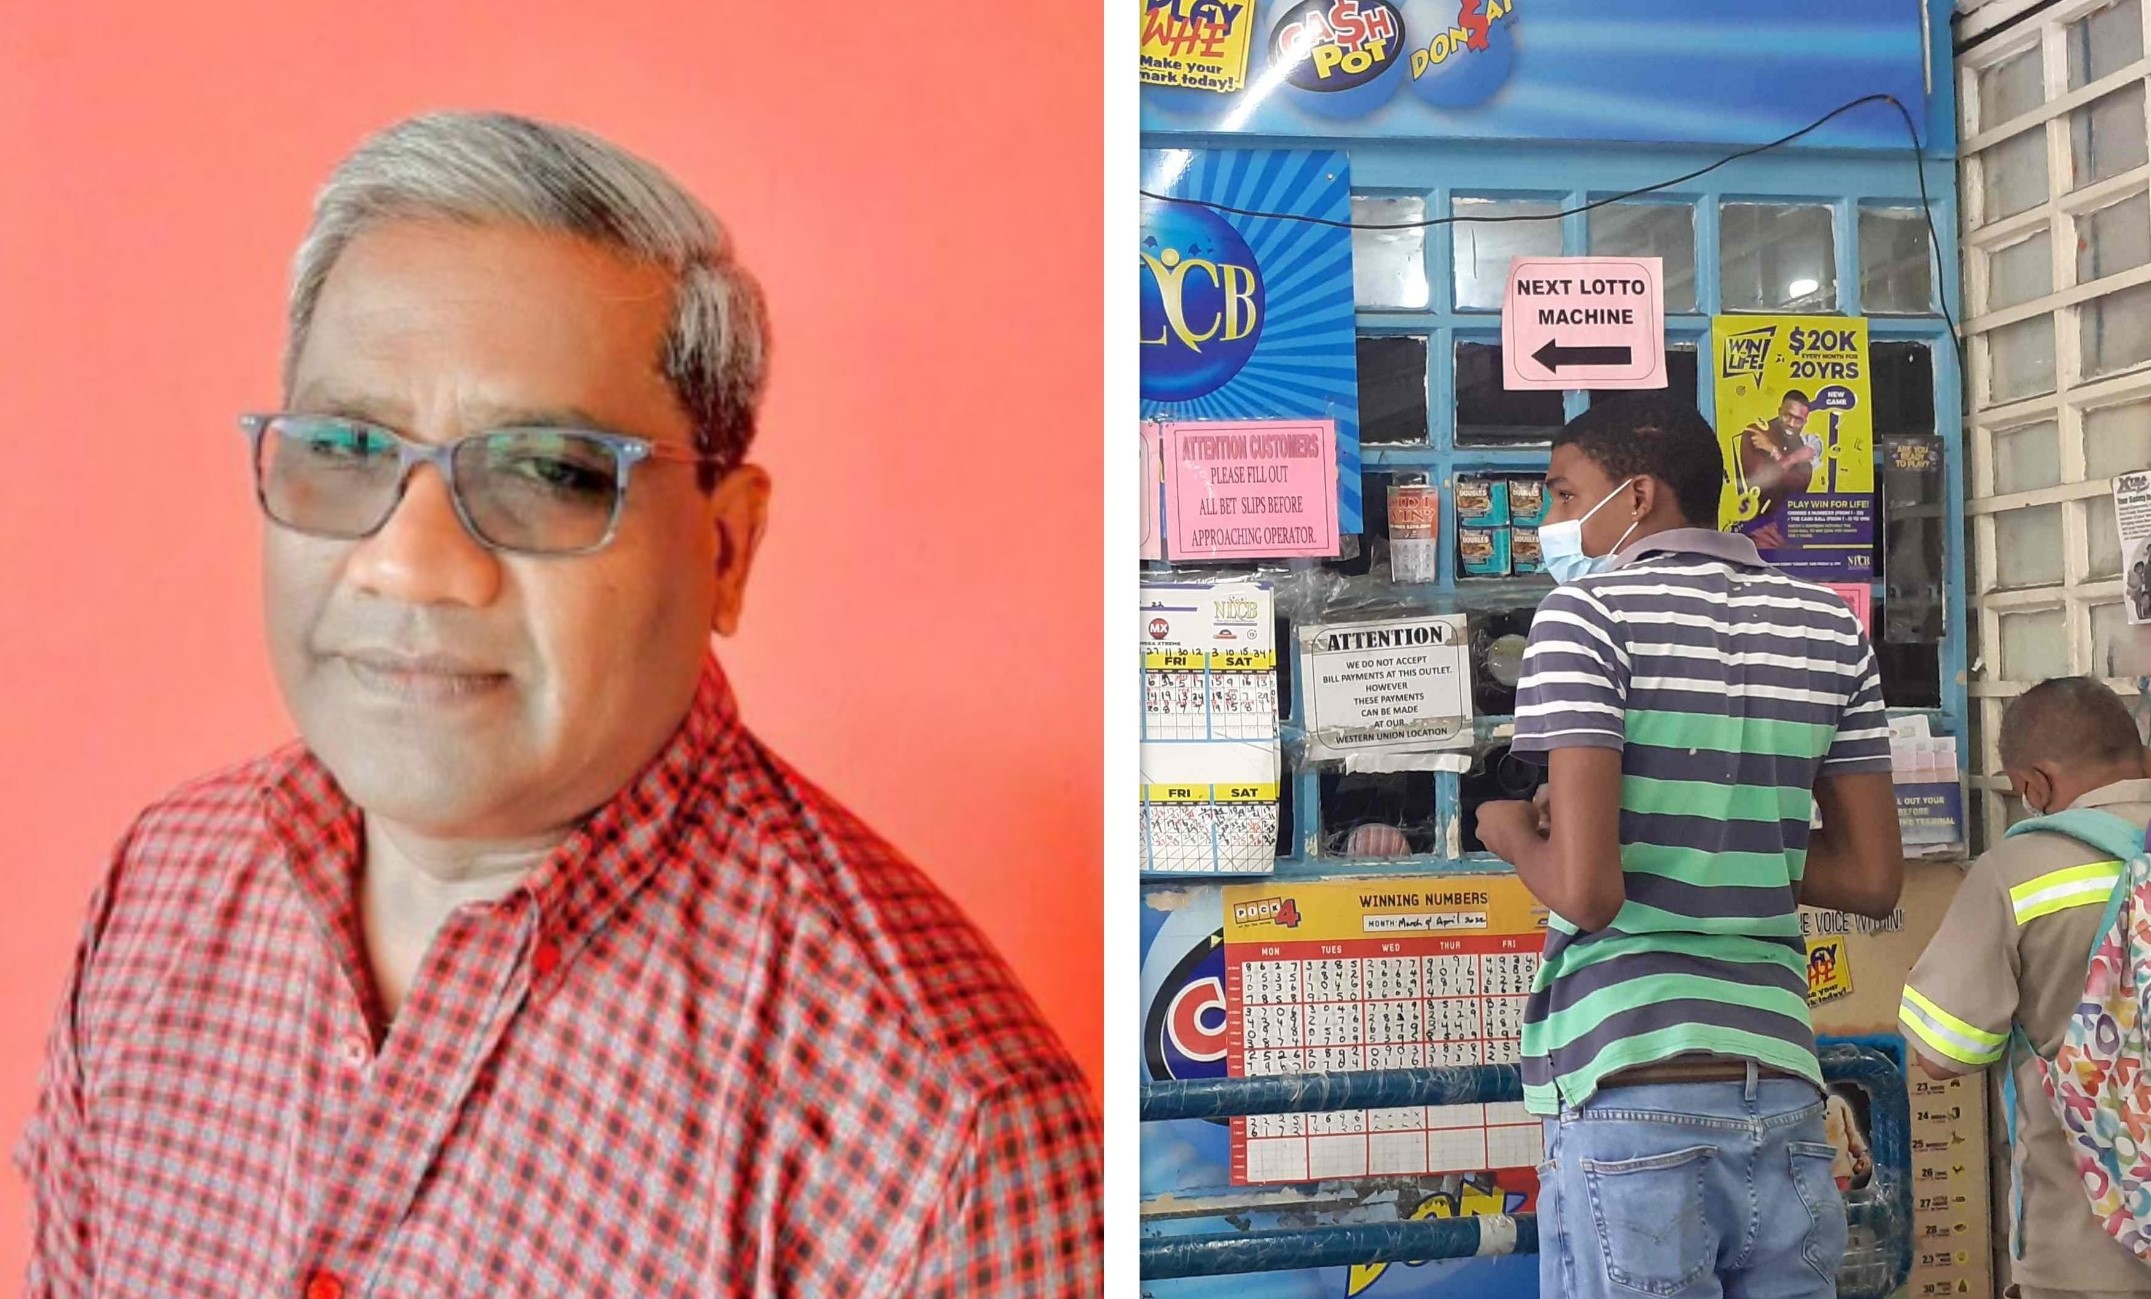 CourtPay at Lotto booths a hassle; agents told not to participate